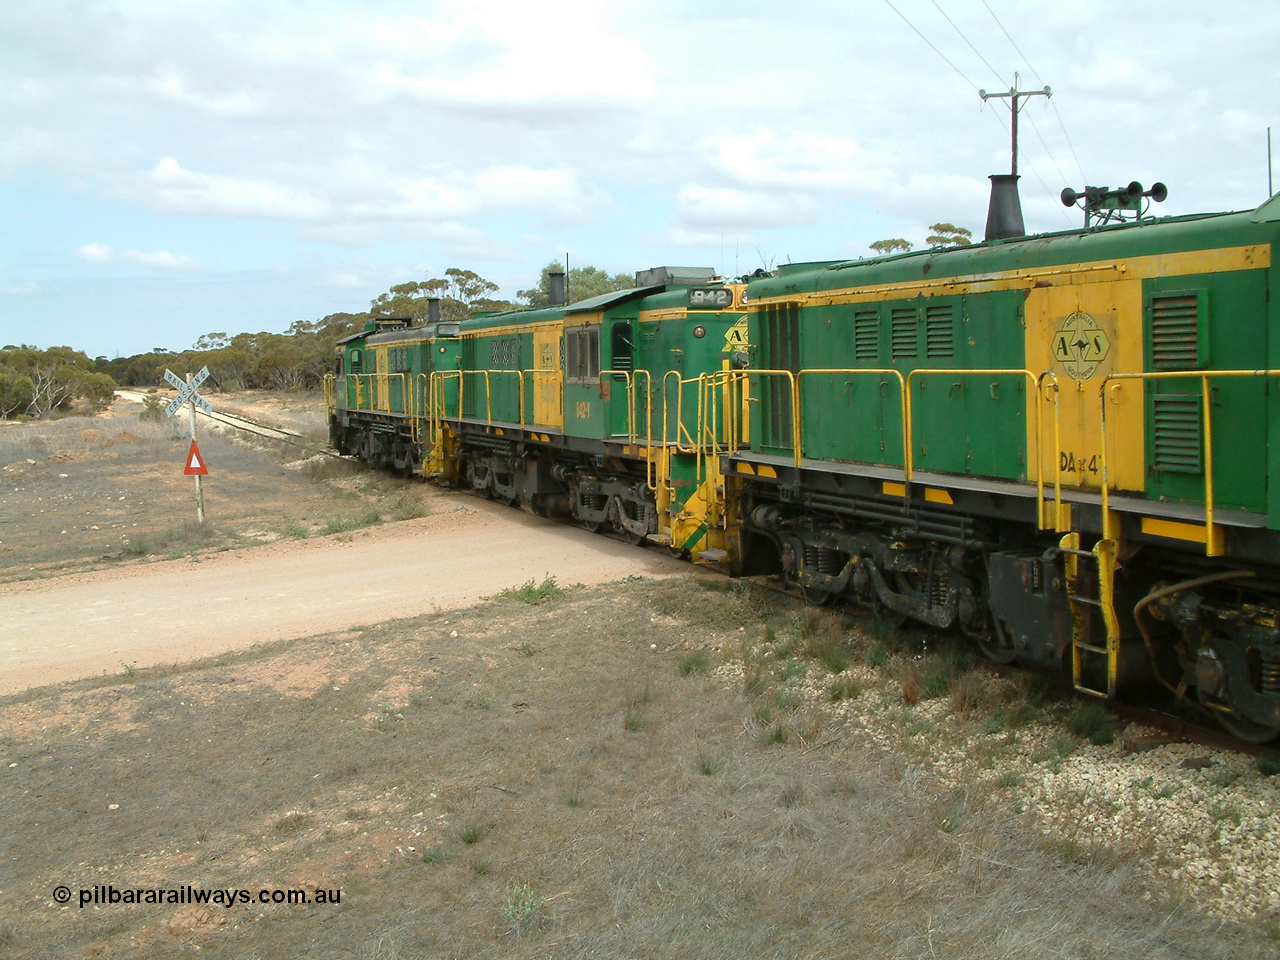 030409 115614
Darke Peake, at the 195 km Dog Fence Road grade crossing loaded grain train with 830 class unit 851 AE Goodwin ALCo model DL531 serial 84137, 851 has spent its entire operating career on the Eyre Peninsula, leads fellow 830 class 842 serial 84140 and a rebuilt unit DA 4, rebuilt from 830 class unit 839 by Port Augusta Workshops, retains original serial 83730 and model DL531 with the first twelve waggons behind the locos XNW type.
Keywords: 830-class;842;84140;AE-Goodwin;ALCo;DL531;